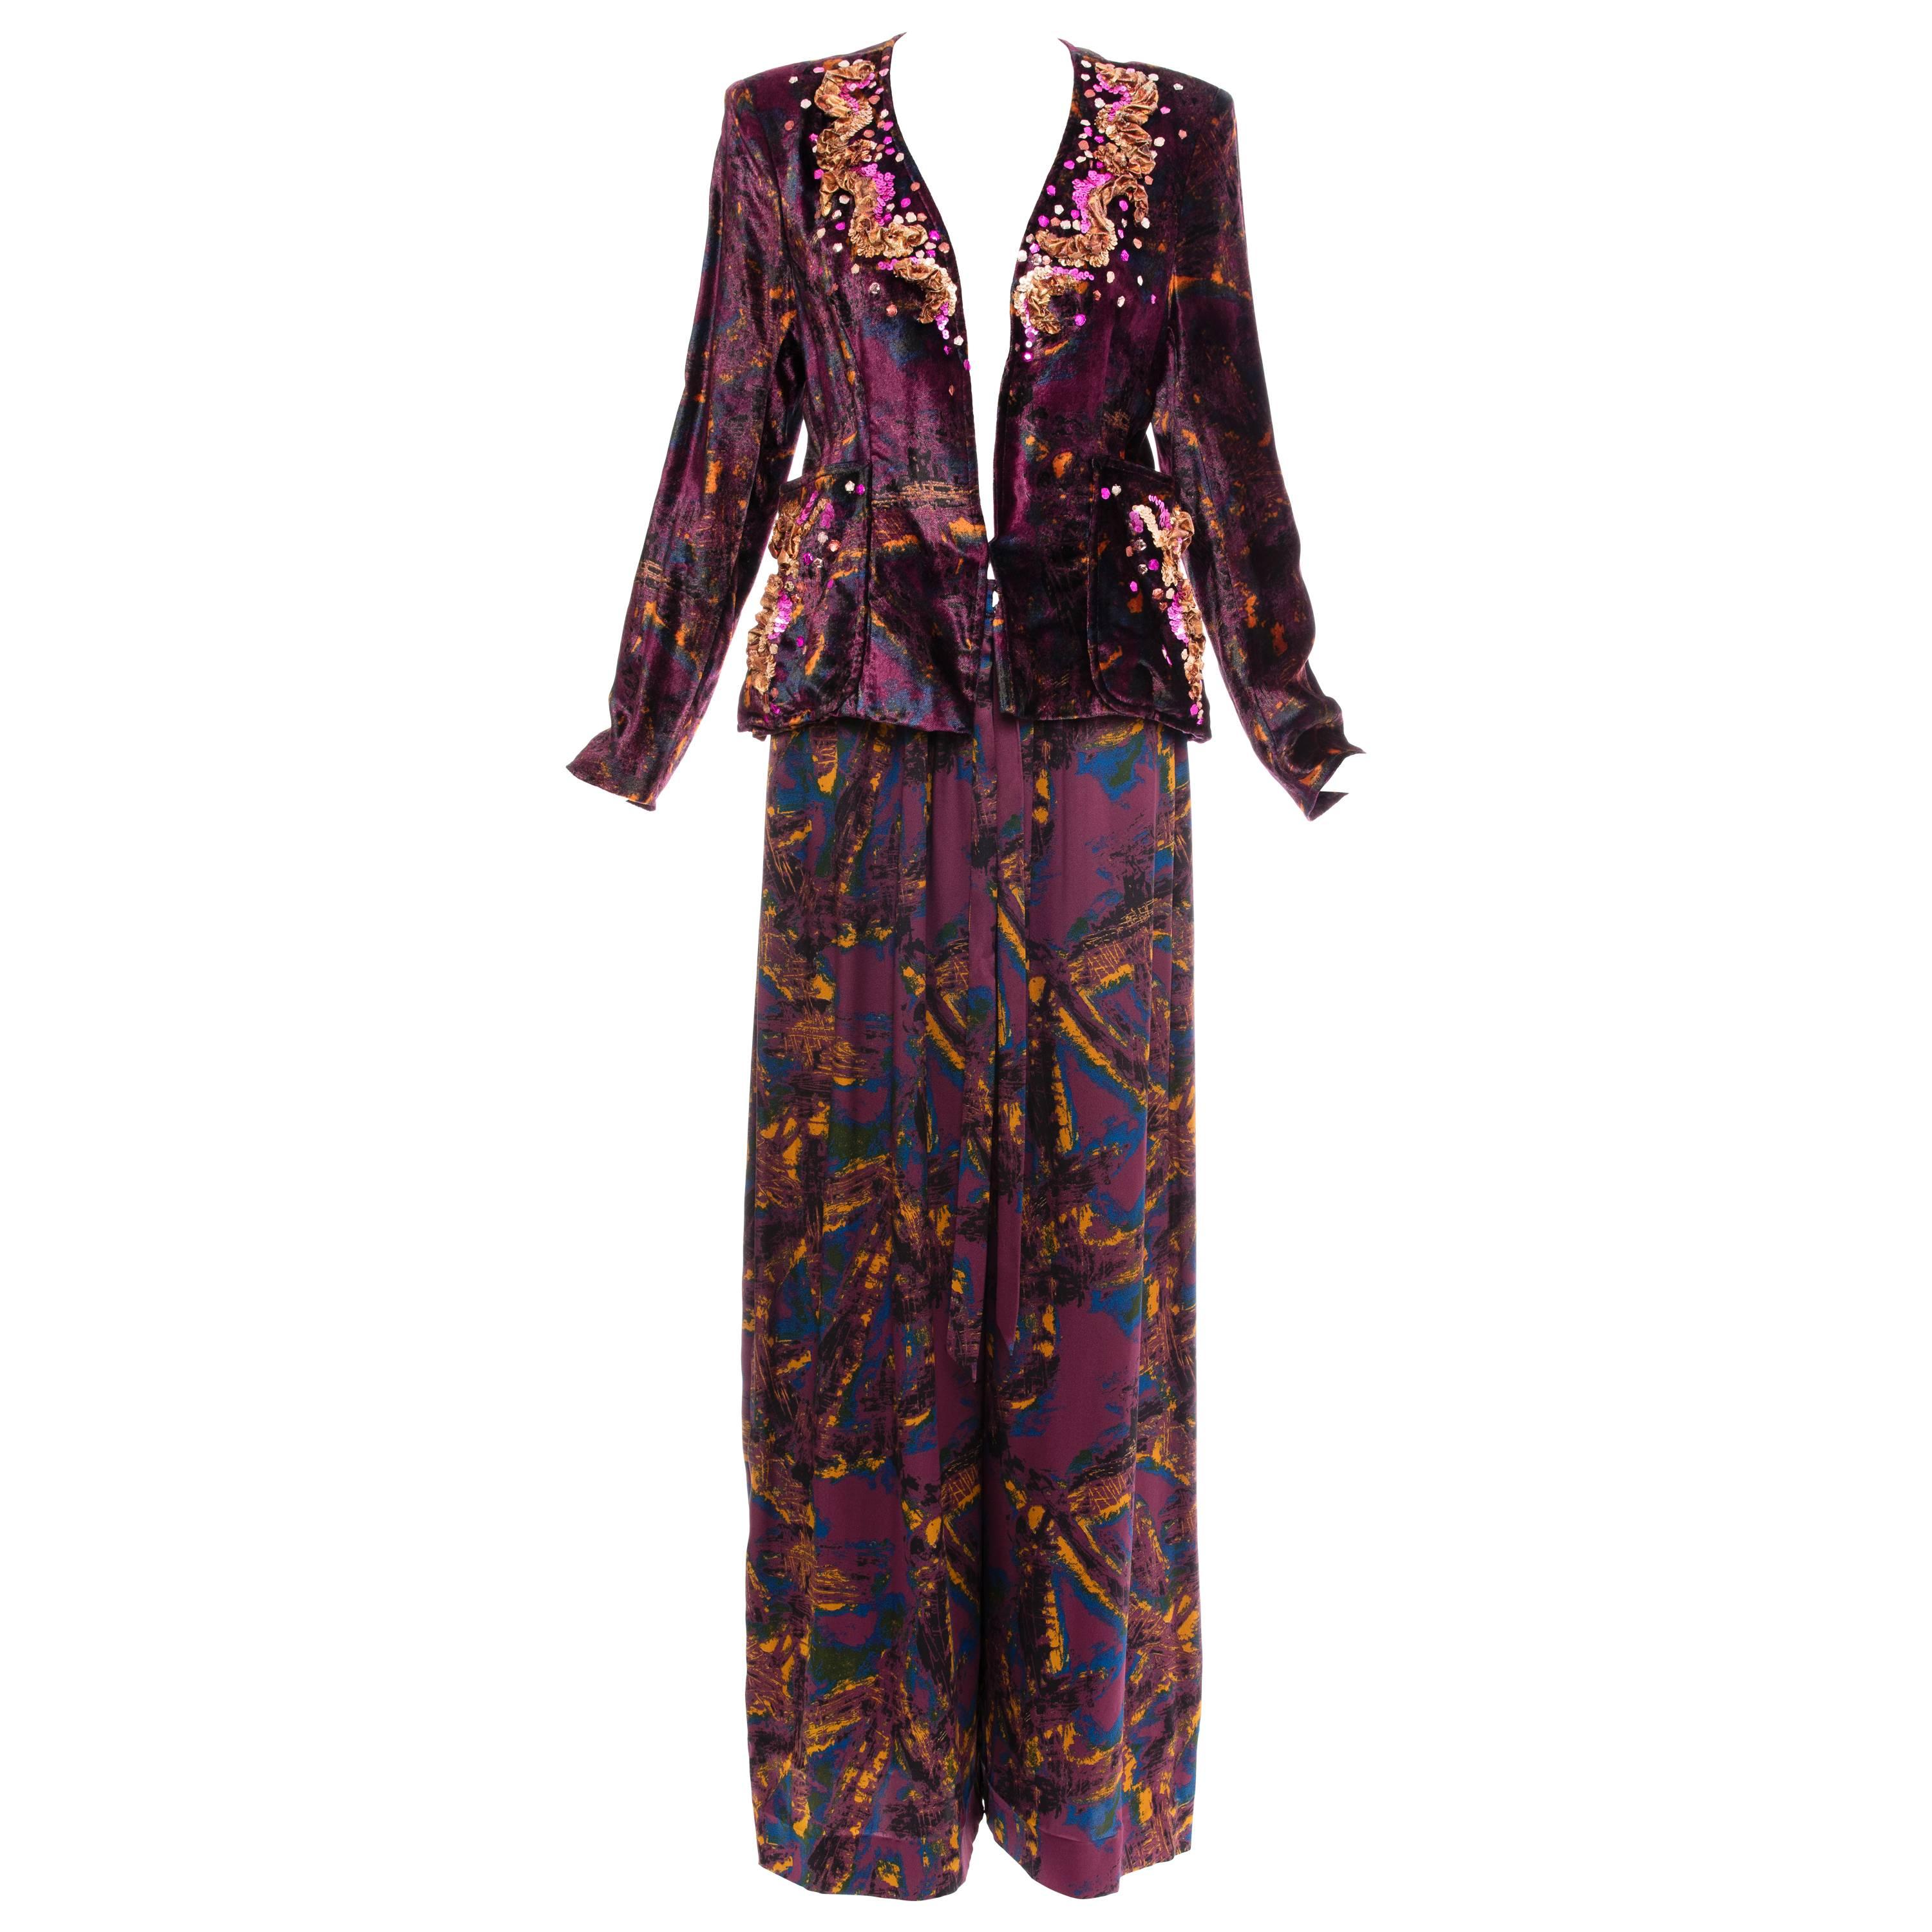 Christian Lacroix Printed Silk Charmeuse Palazzo Pant Suit, Circa 1980's For Sale